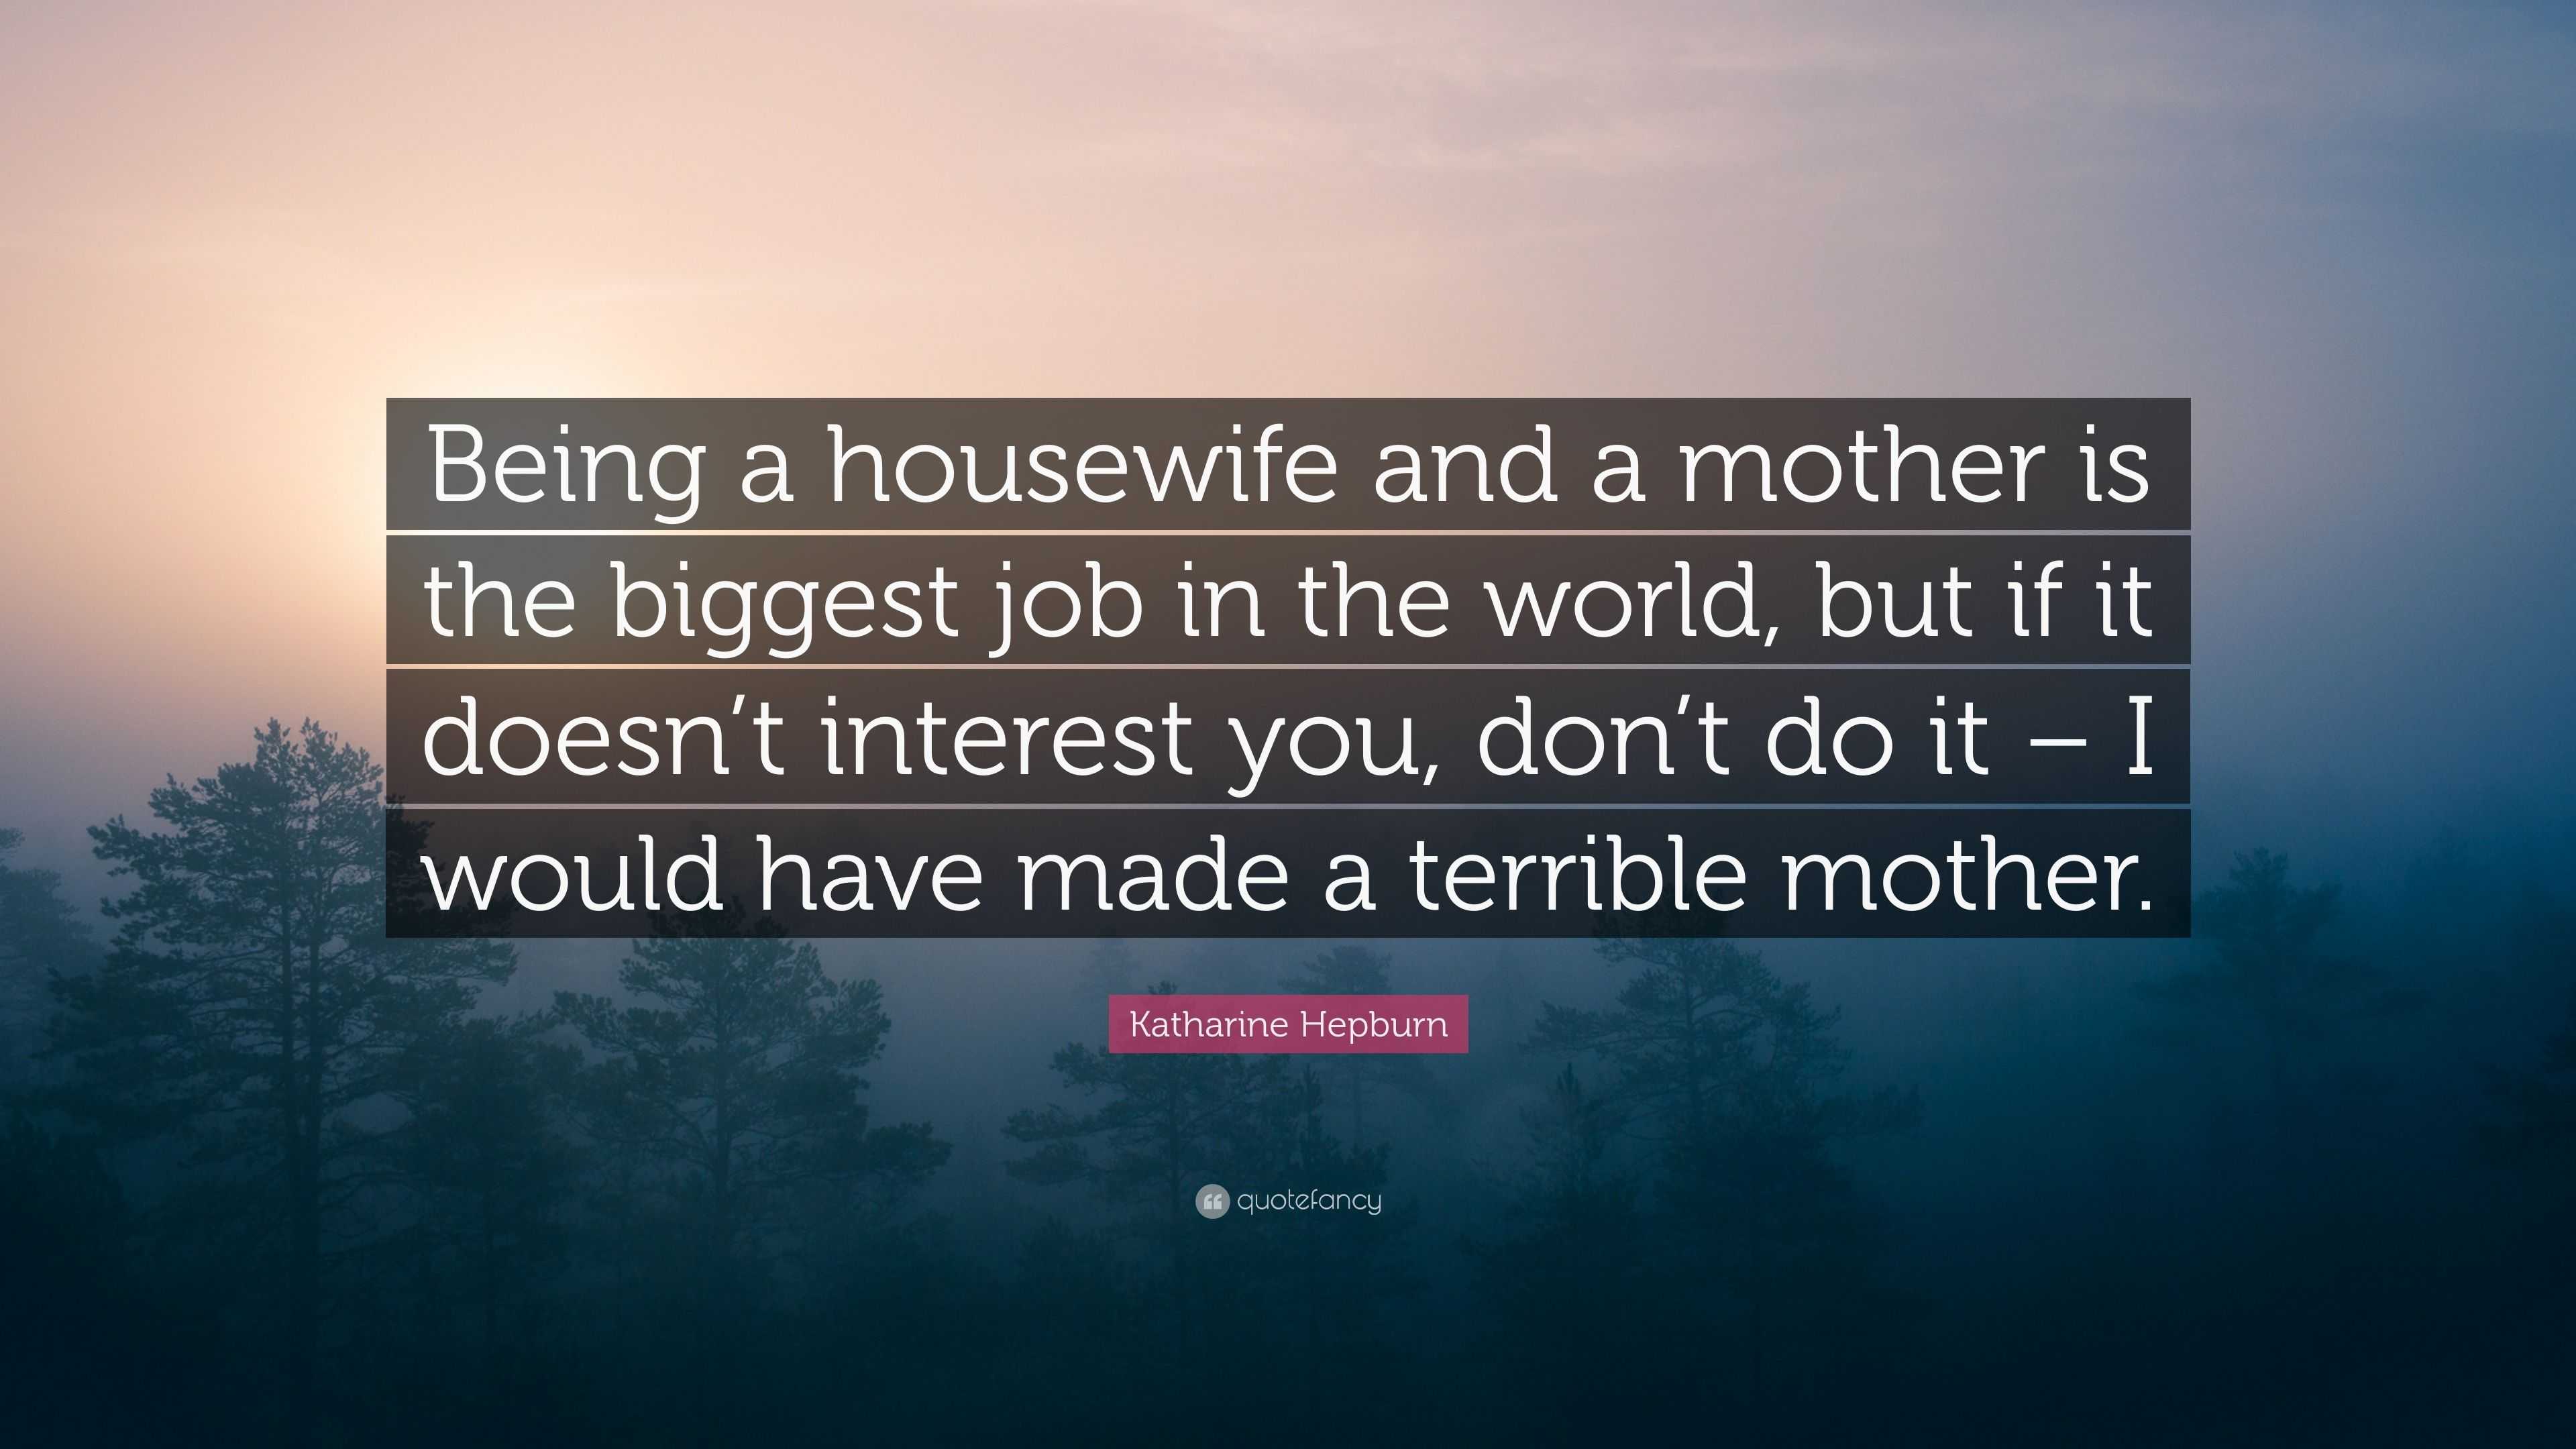 Katharine Hepburn Quote: “Being a housewife and a mother is the biggest ...